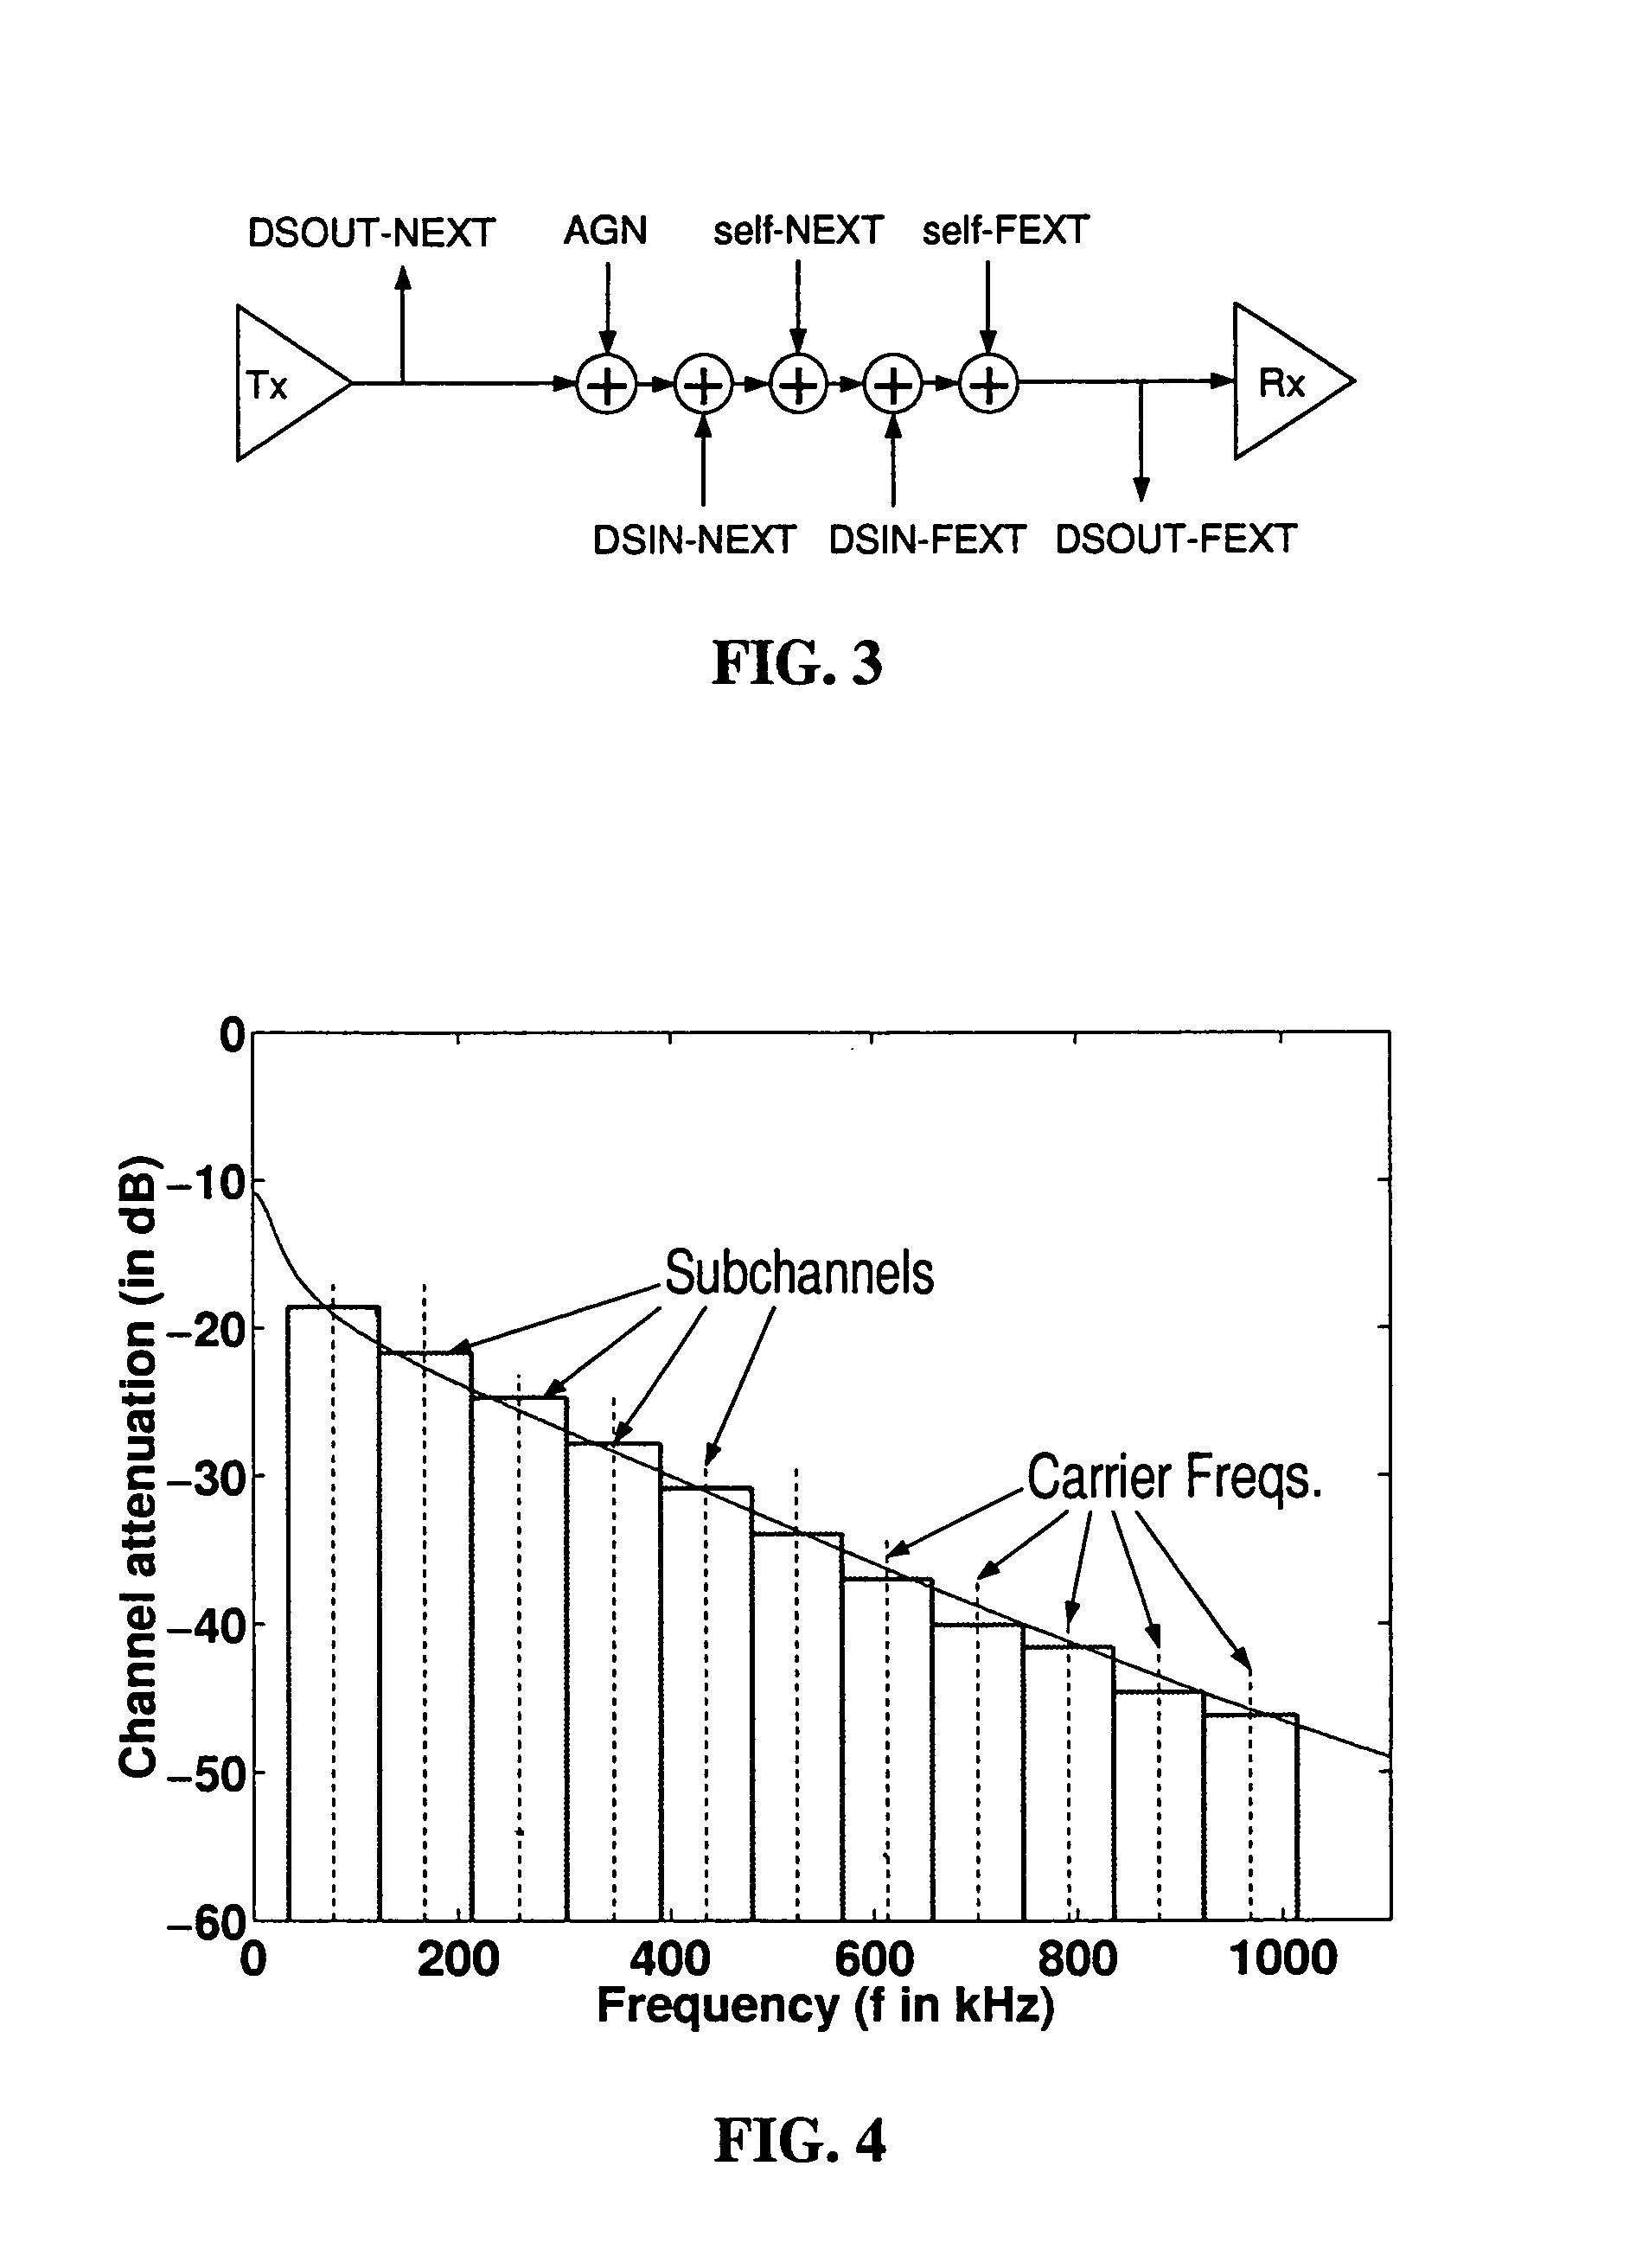 Signaling Techniques in channels with asymmetric powers and capacities